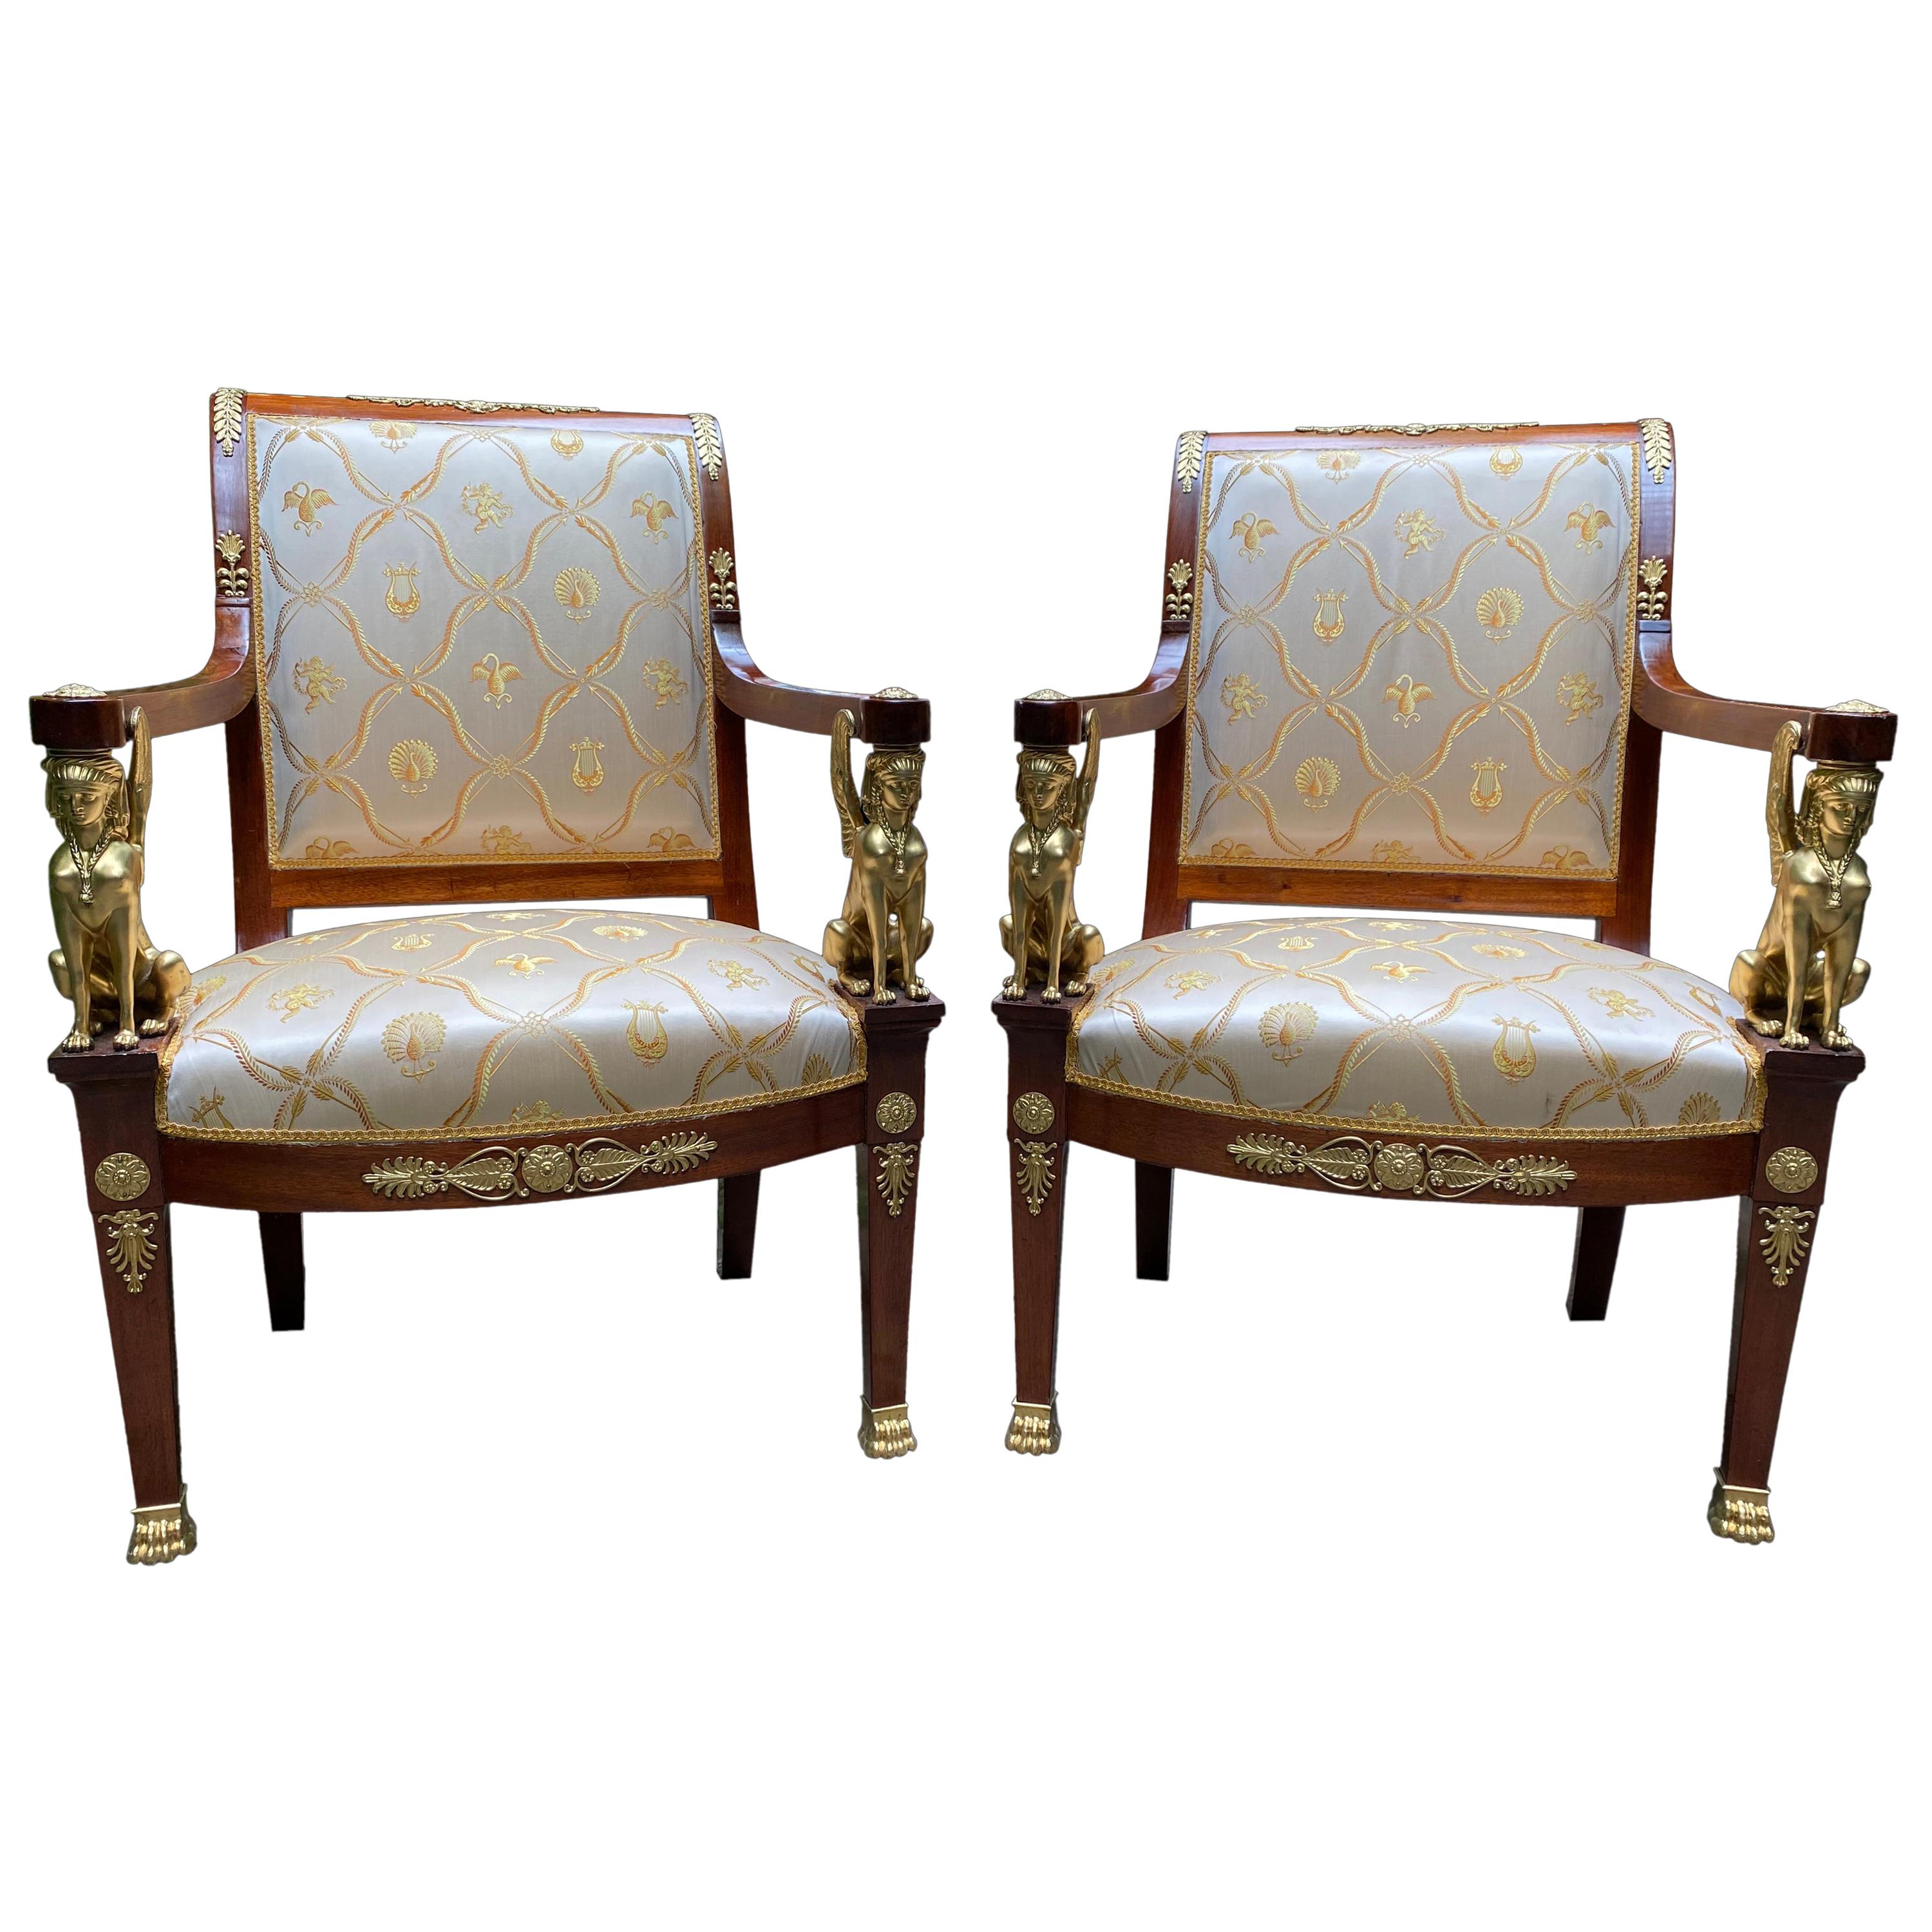 French Empire Armchairs with Bronze Mounts, 19th Century For Sale